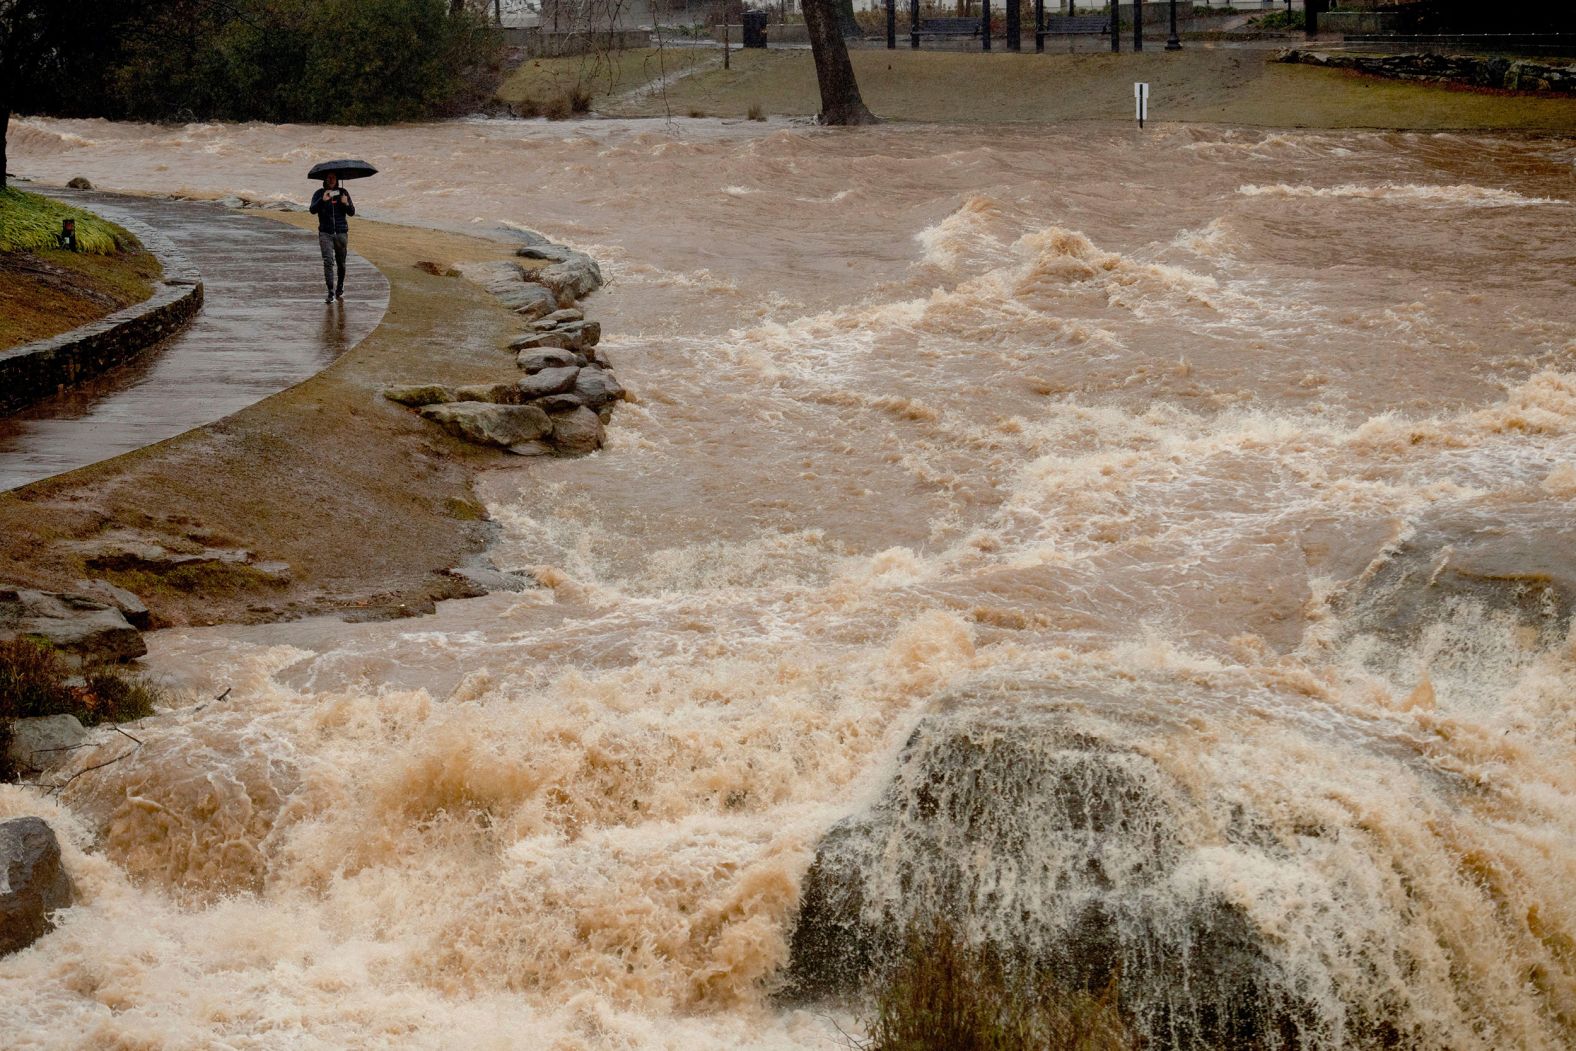 A man braves the rain Tuesday while taking videos of the Reedy River's rushing water in Greenville, South Carolina.